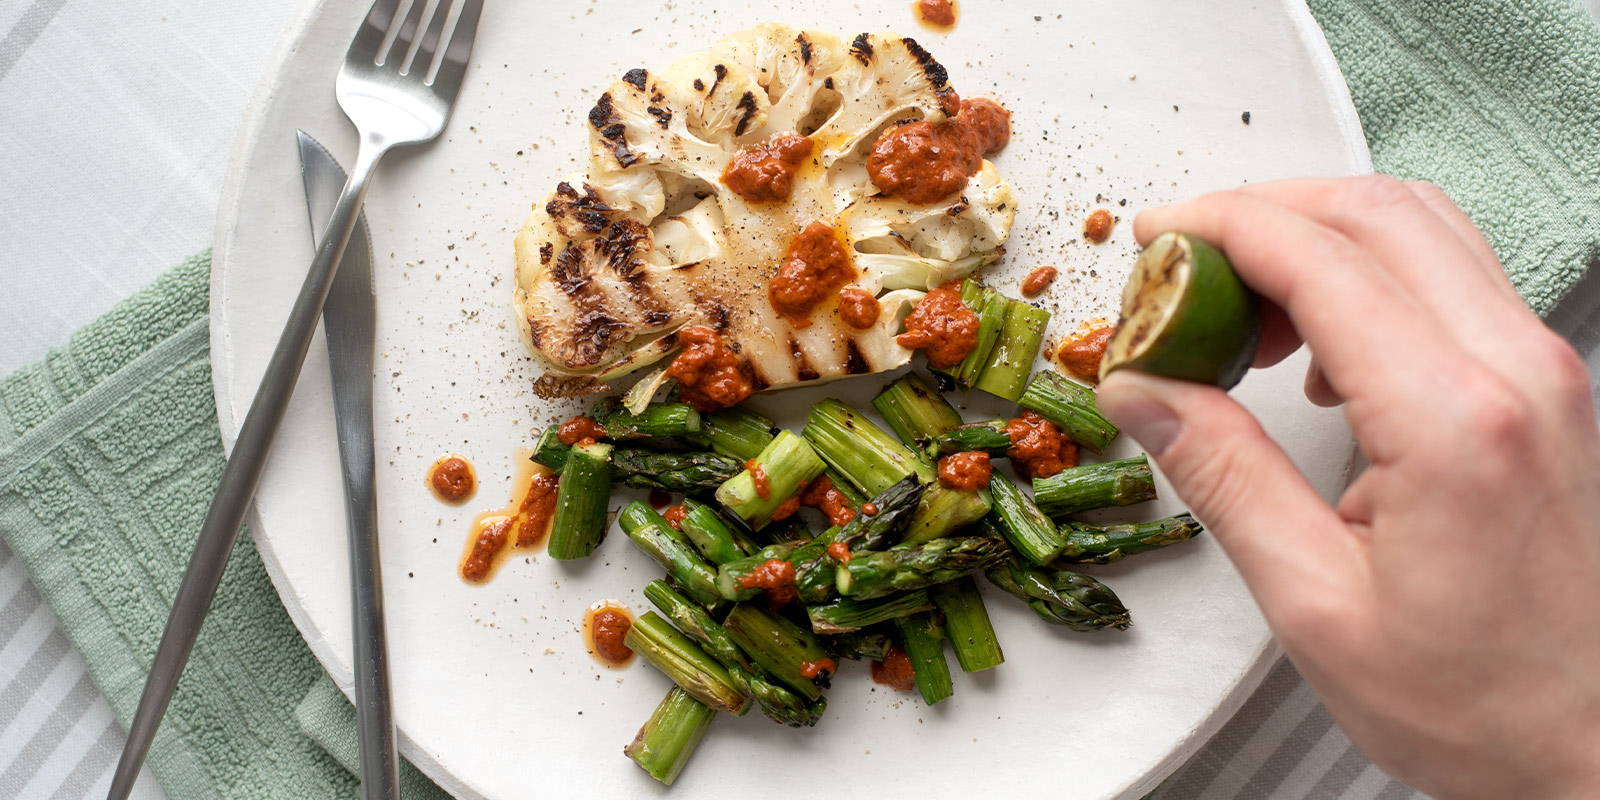 LIme juice is being squeezed over a plate of grilled sliced cauliflower and grilled bite-sizsed asparagus and garnished with harissa.